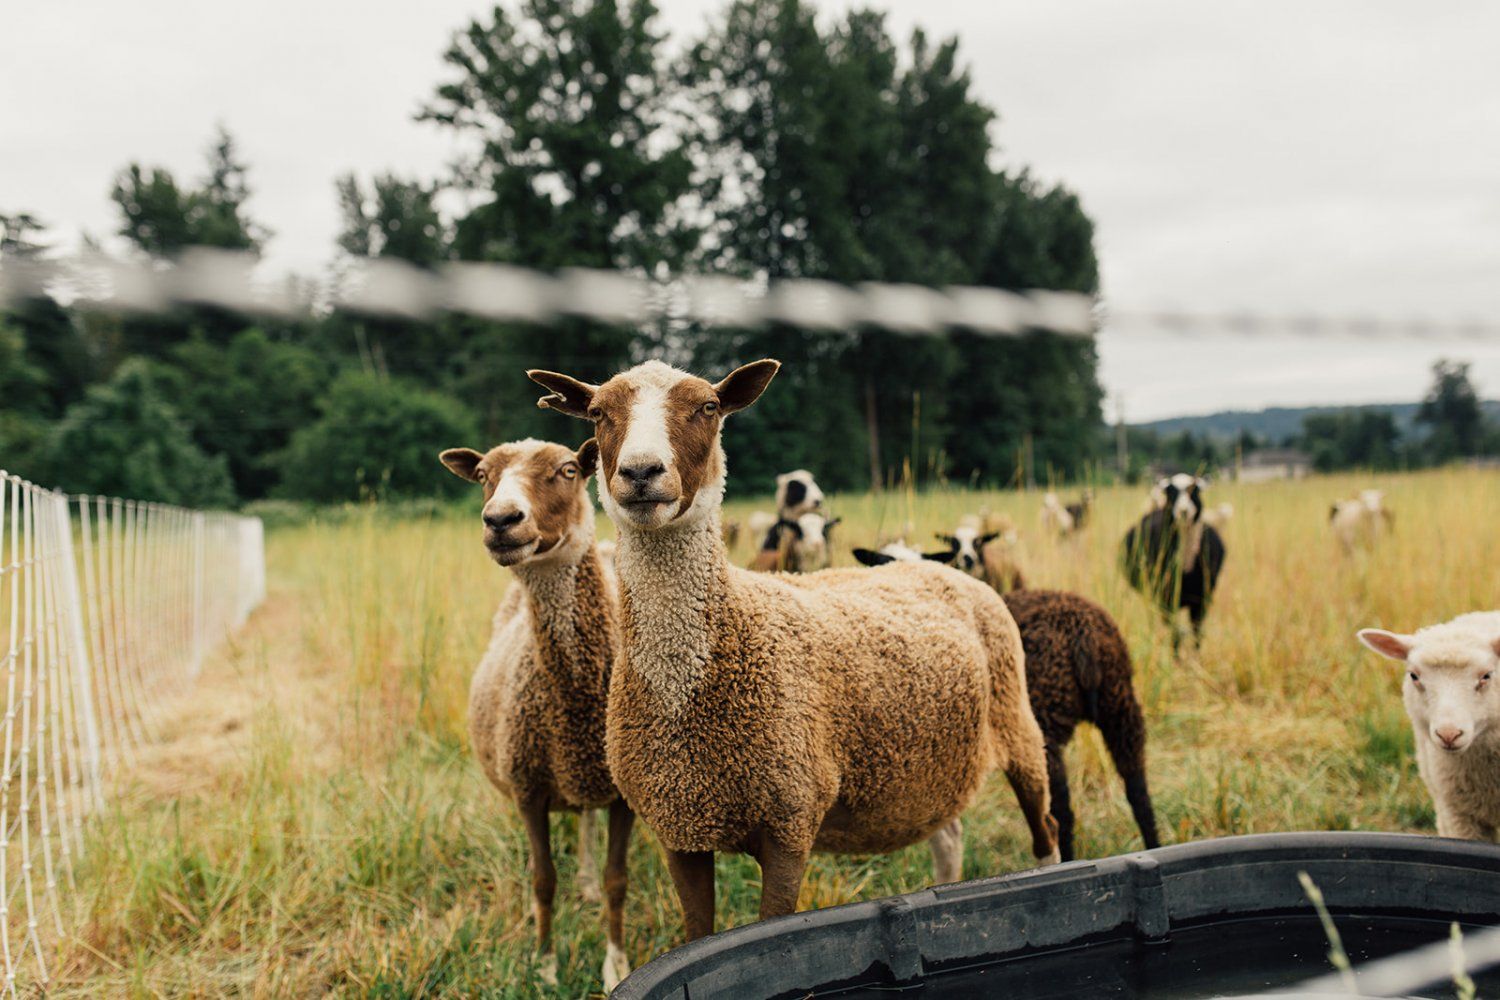 Previous Happening: Farm Happenings for July 29, 2021: Hot Sheep Summer